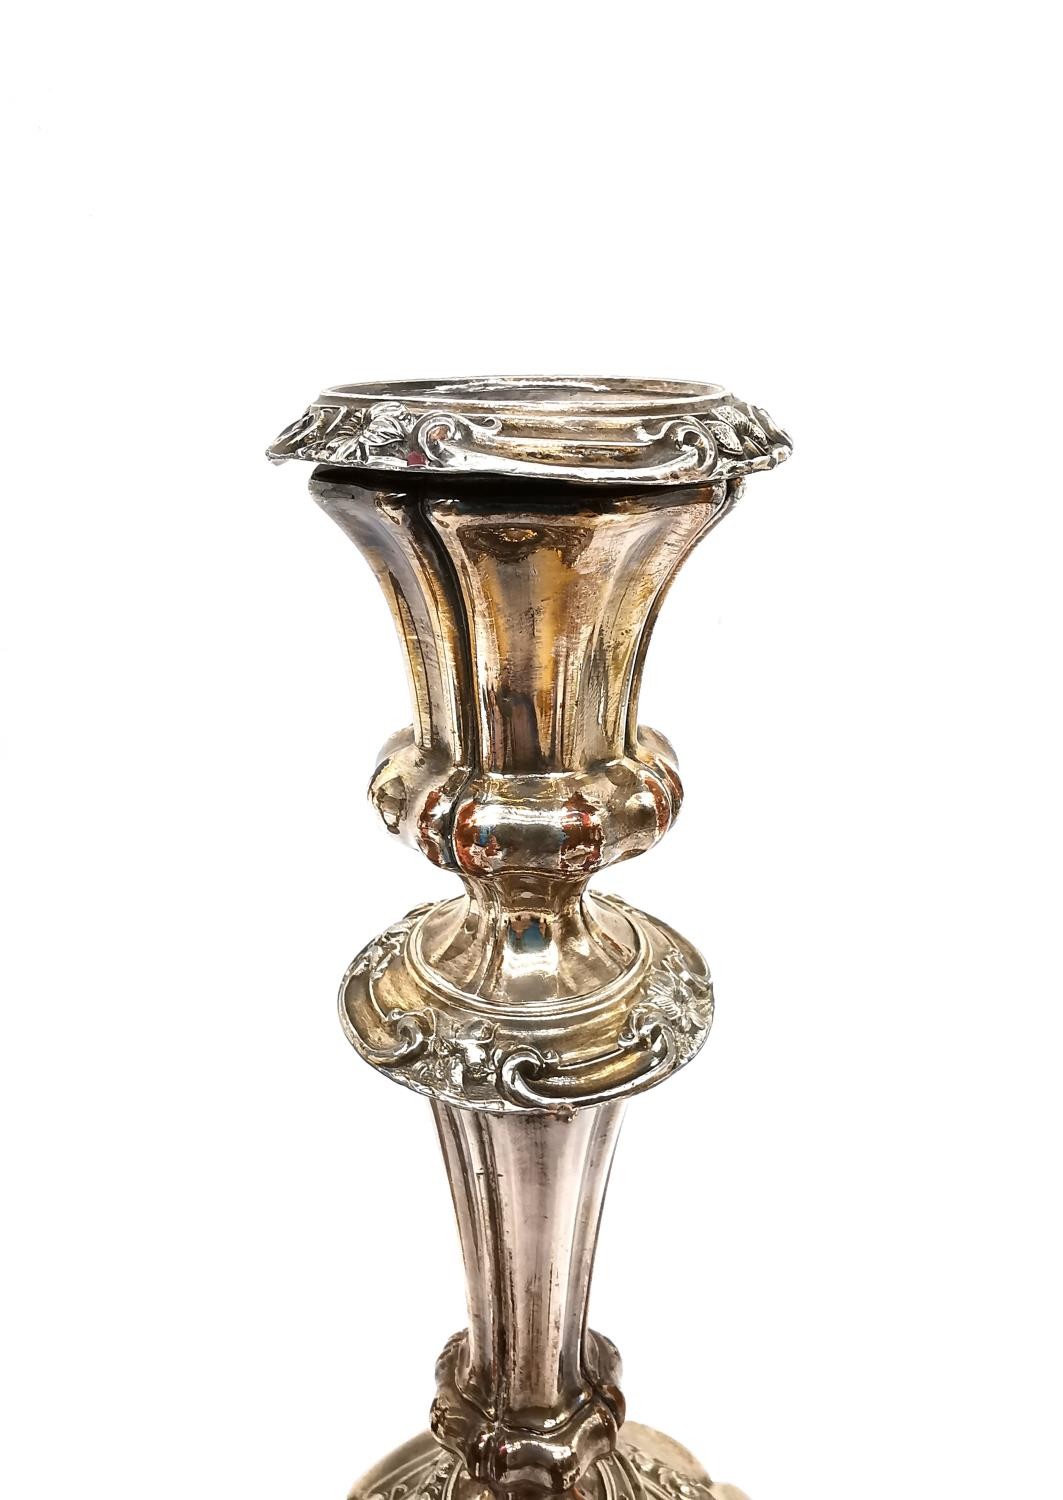 Two pairs of 19th century Sheffield silver plate repousse weighted candlesticks with floral - Image 4 of 5